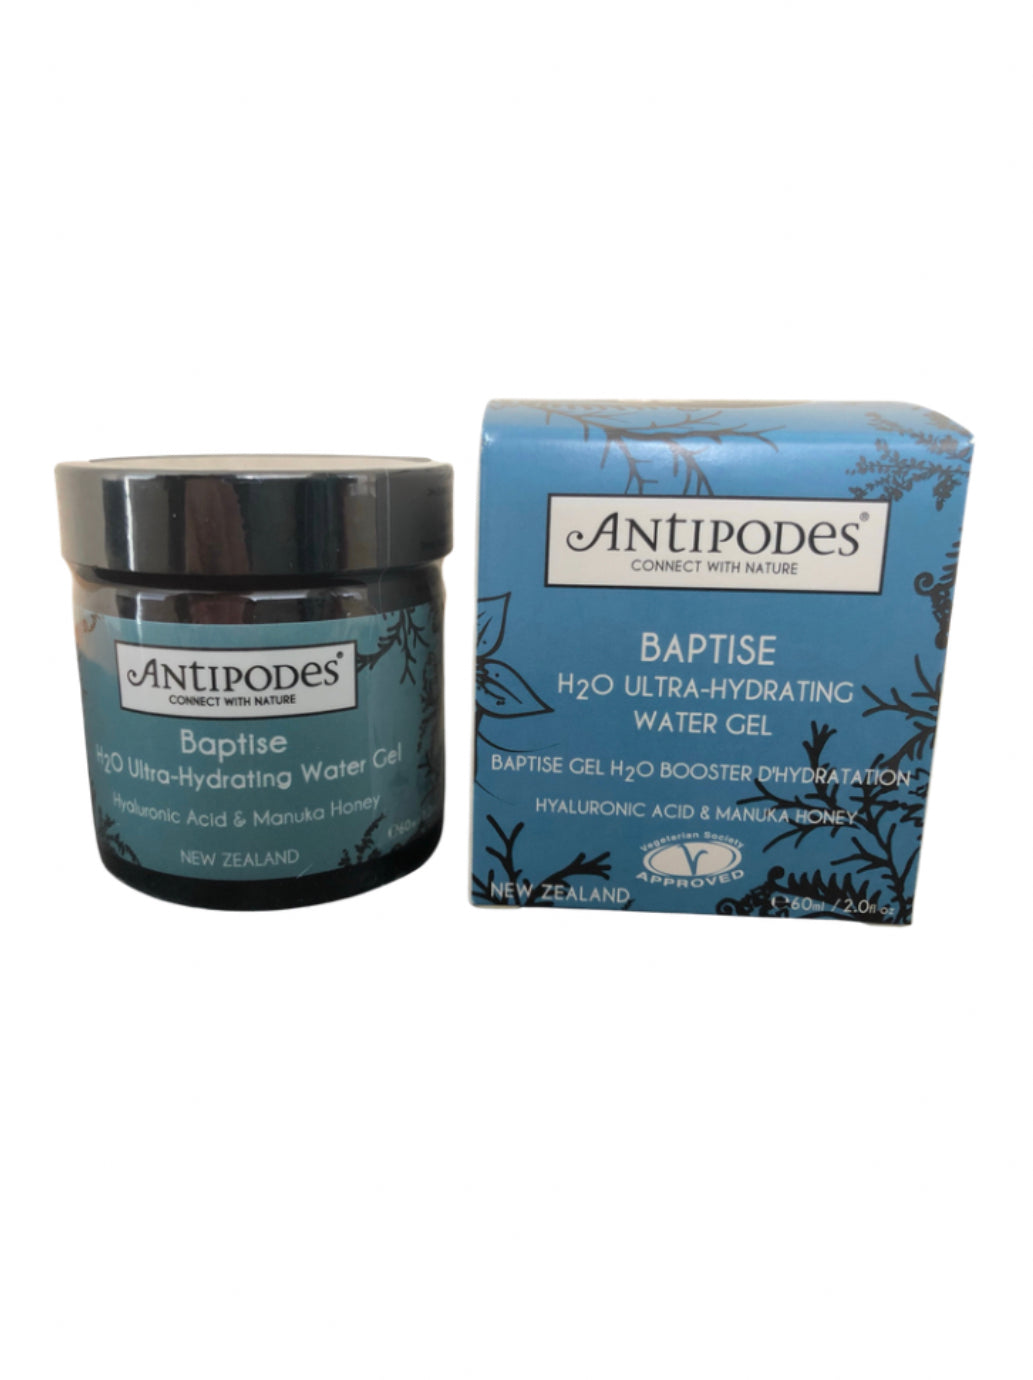 Antipodes Baptise H20 Ultra Hydrating water Gel  60ml